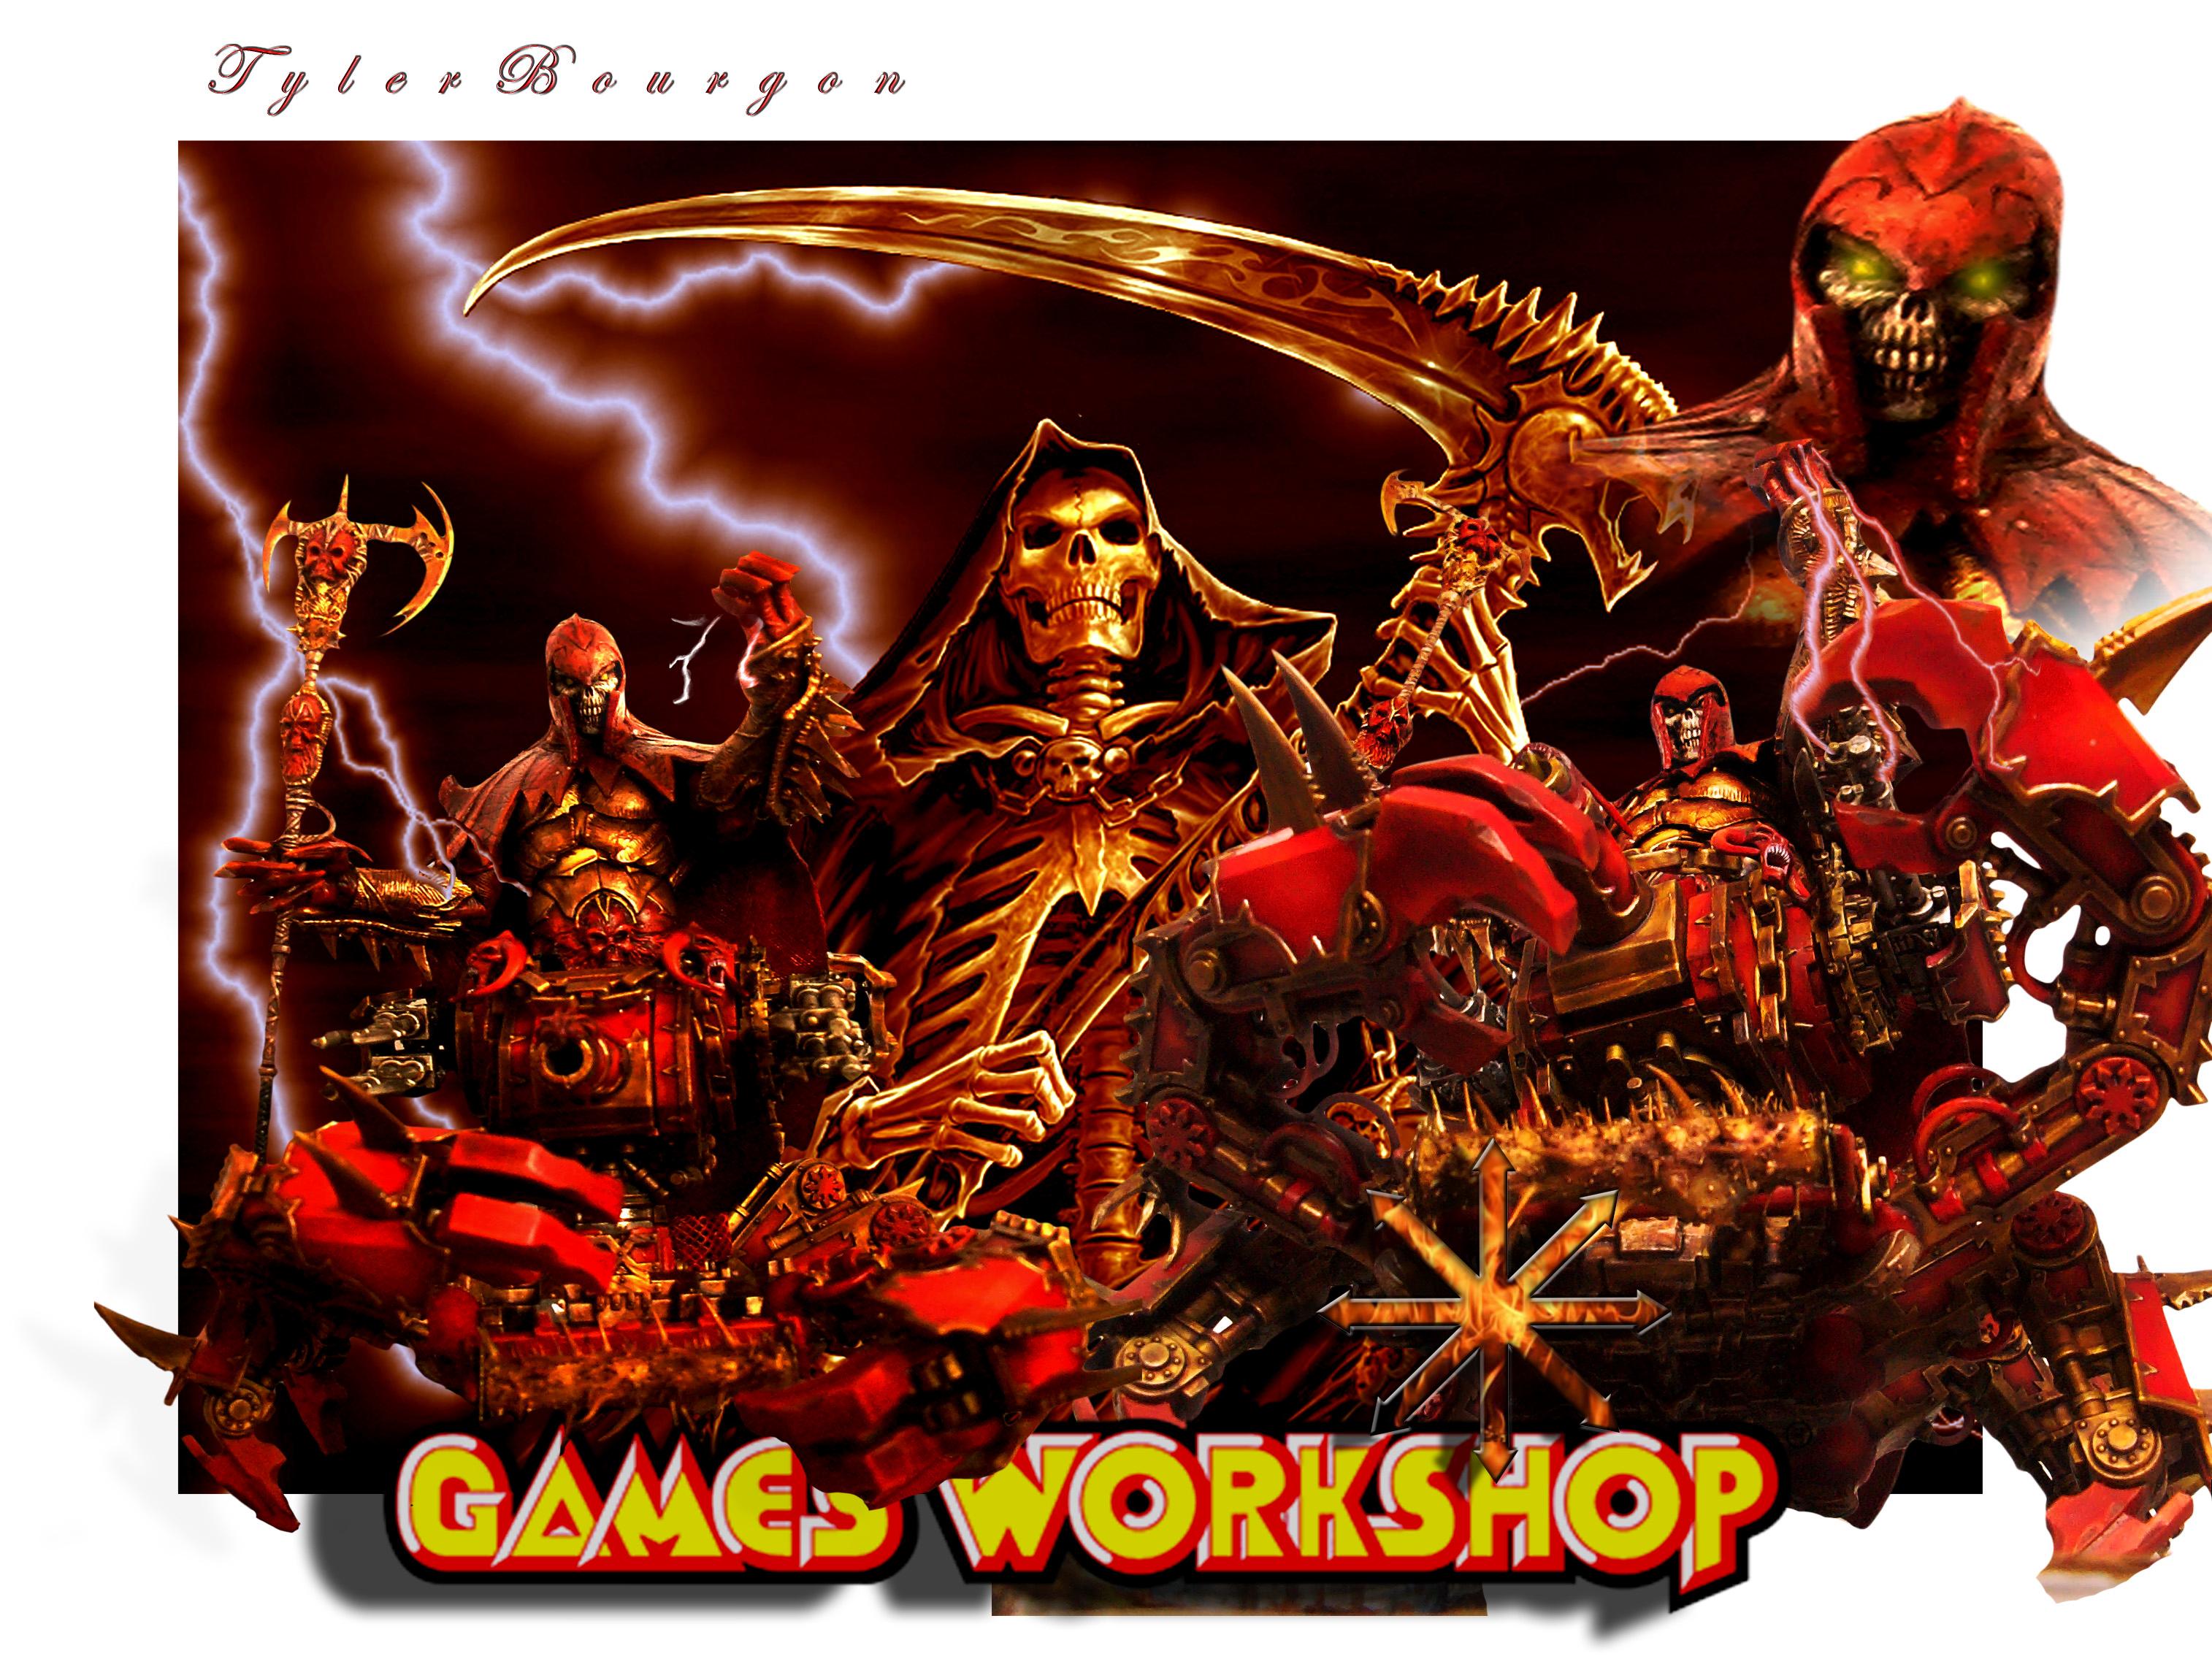 Chaos, Chaos Daemons, Chaos Space Marines, Conversion, Daemons, Defiler, Khorne, Slaughterfiend, Soul Grinder, Warhammer 40,000